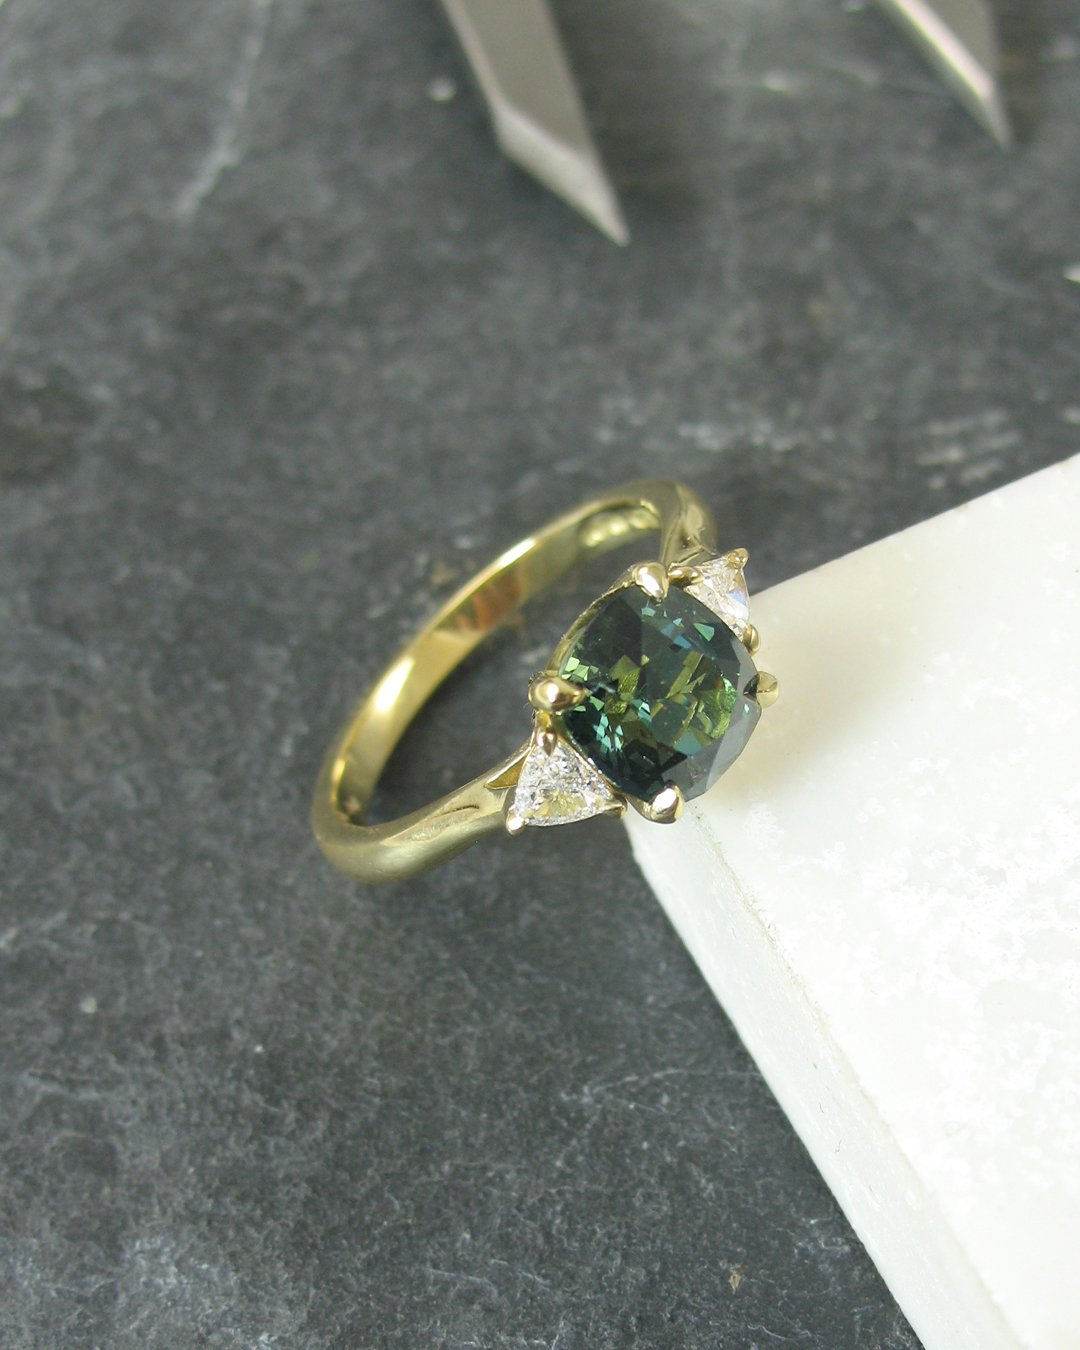 An attractive teal sapphire engagement ring